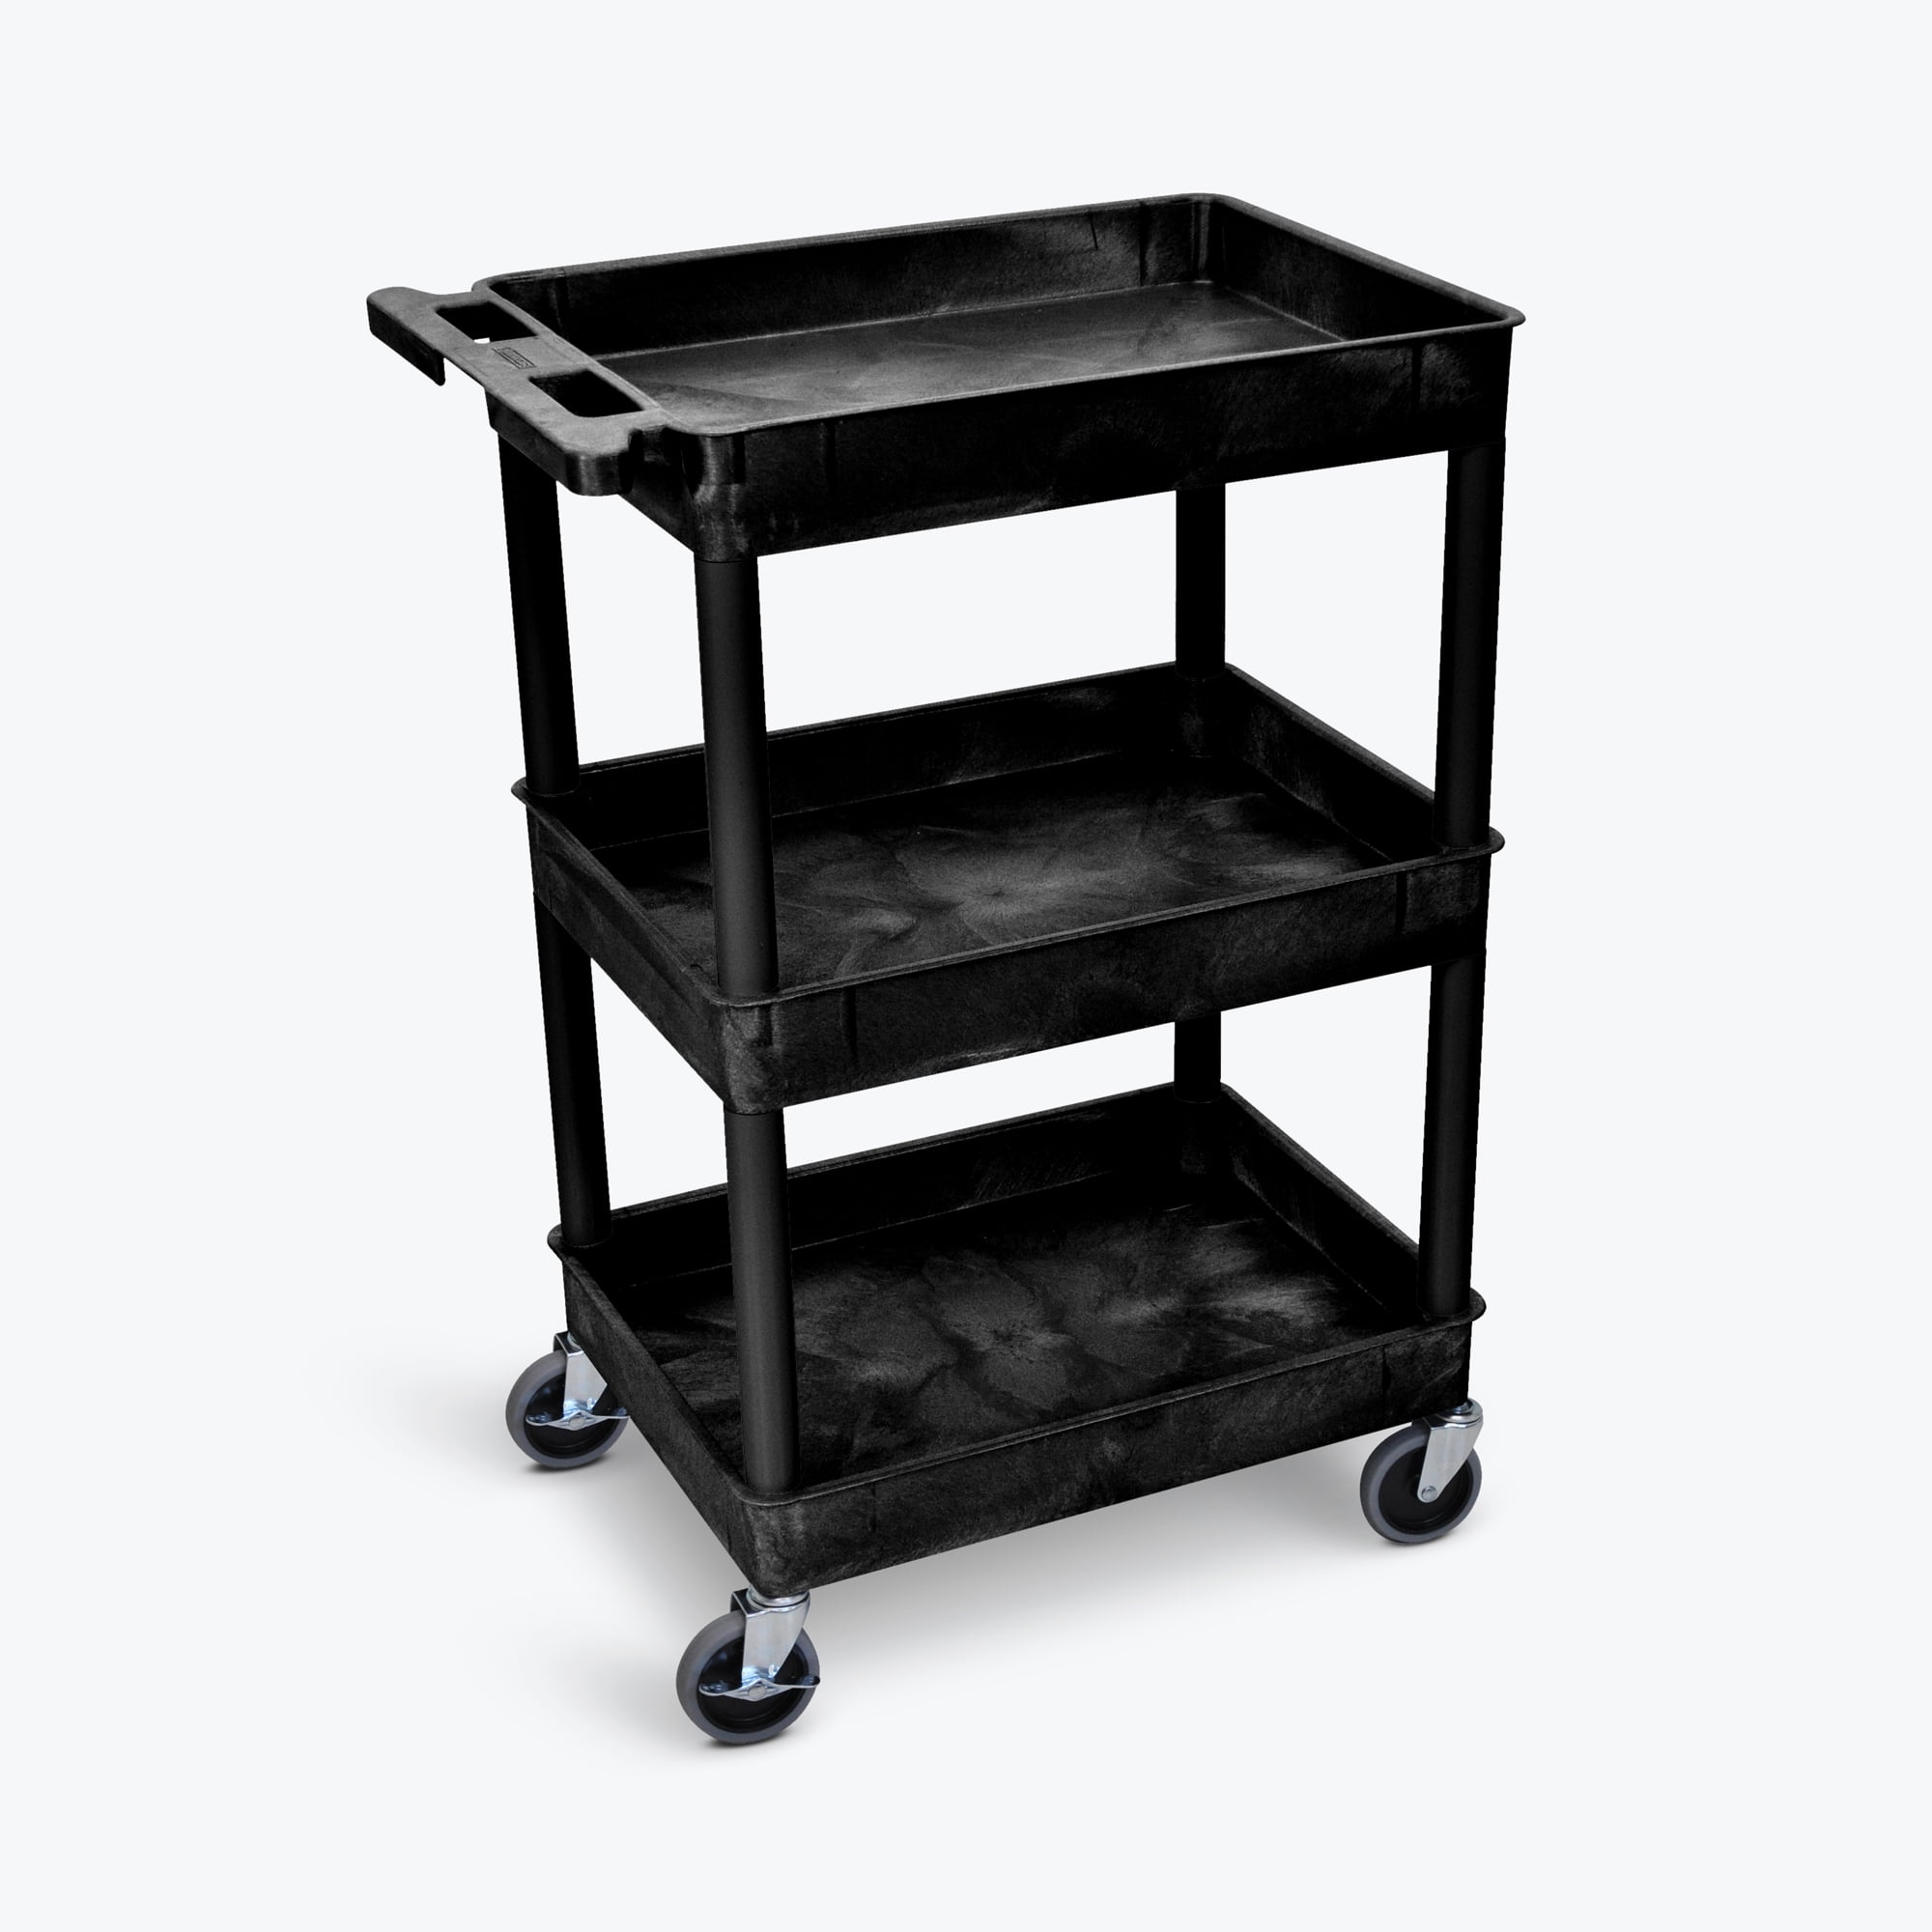 Luxor WT34S 3 Shelves Tuffy Utility Cart Black Small 2day Delivery for sale online 